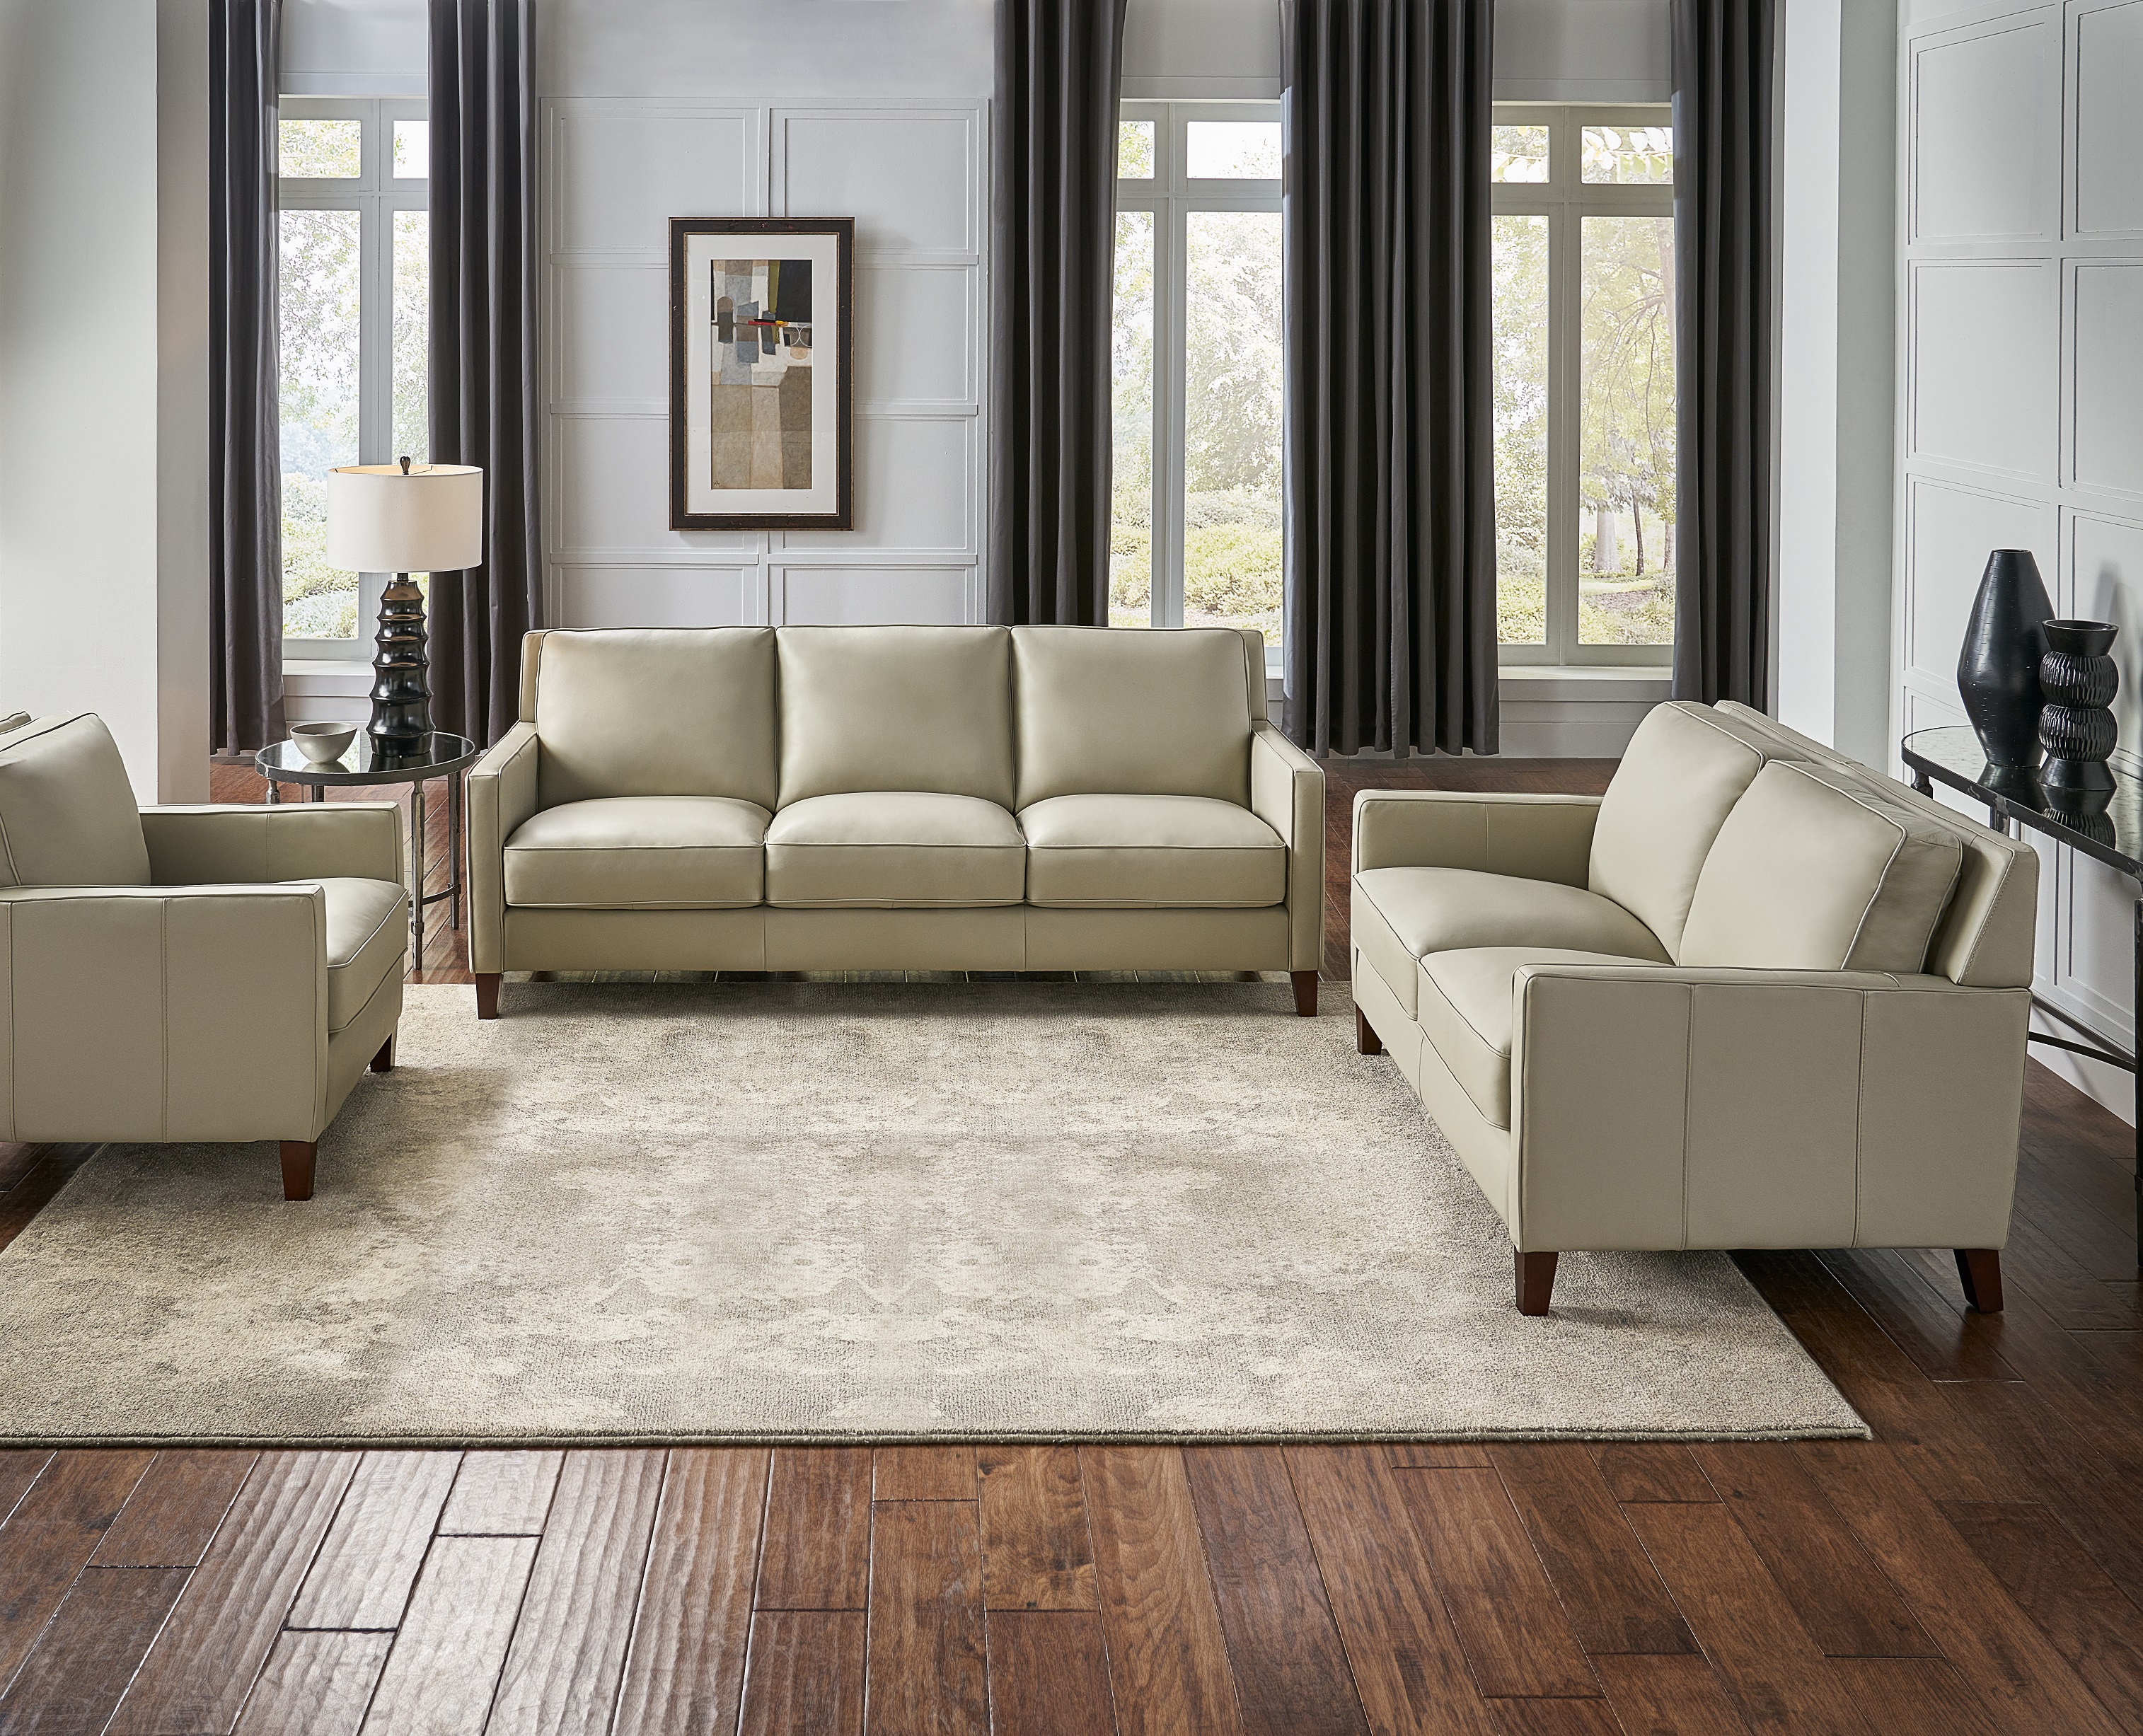 Hydeline Ashby Leather 3PC Sofa Set, Sofa, Loveseat and Chair, Ice - image 1 of 8